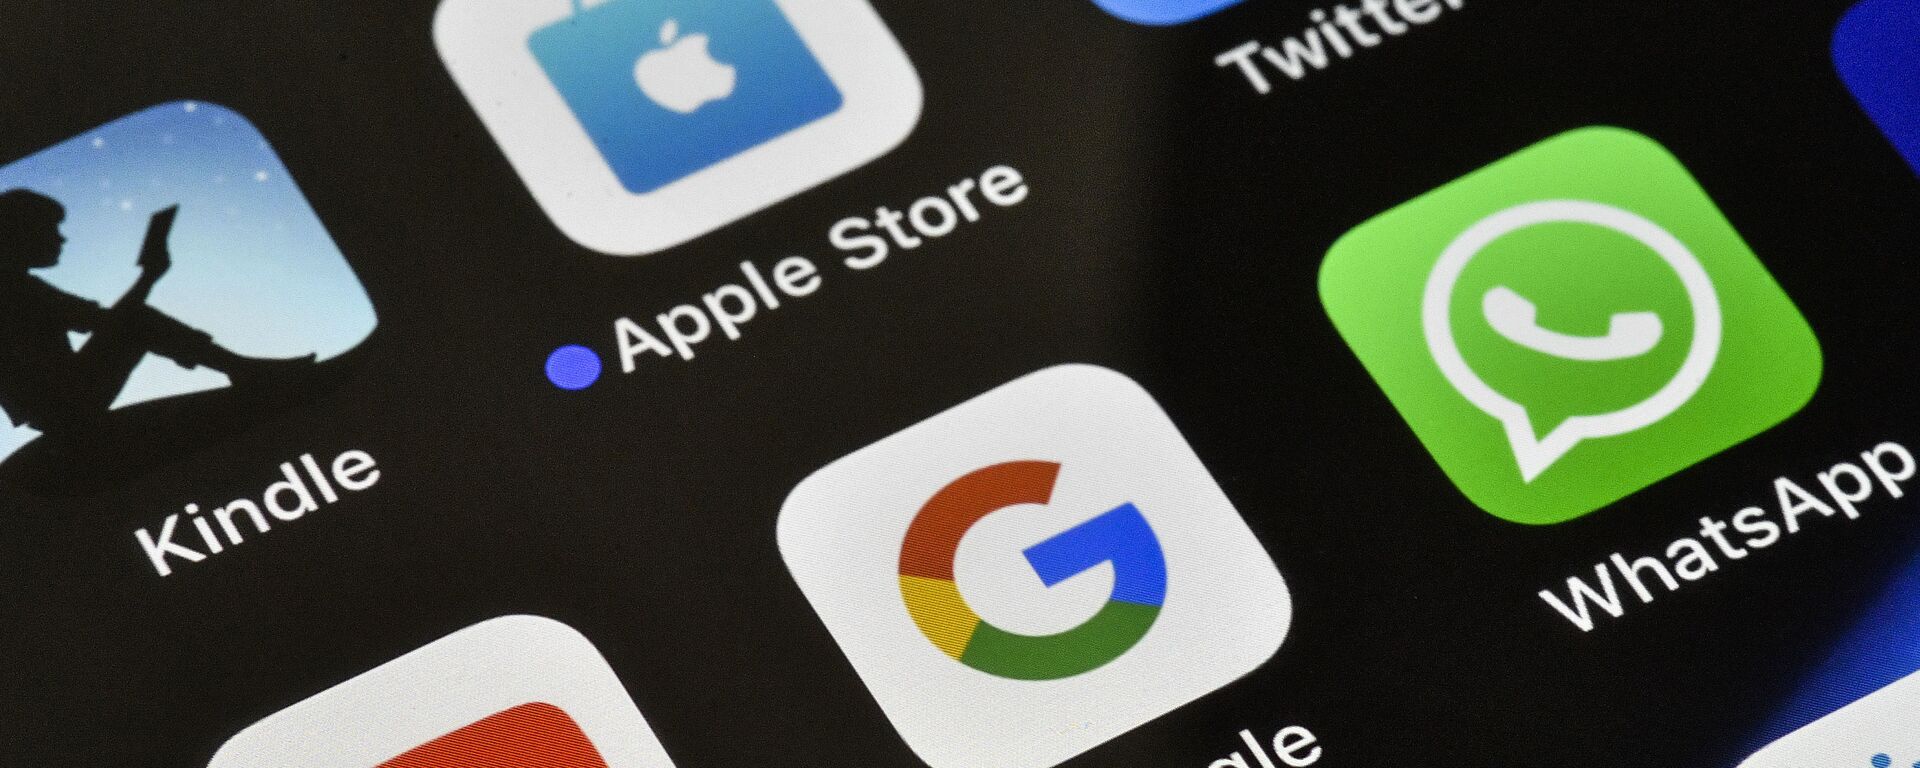 The icons of Google, WhatsApp and YouTube are pictured on an iPhone on Thursday, Nov. 15, 2018 in Gelsenkirchen, Germany - Sputnik International, 1920, 03.06.2020